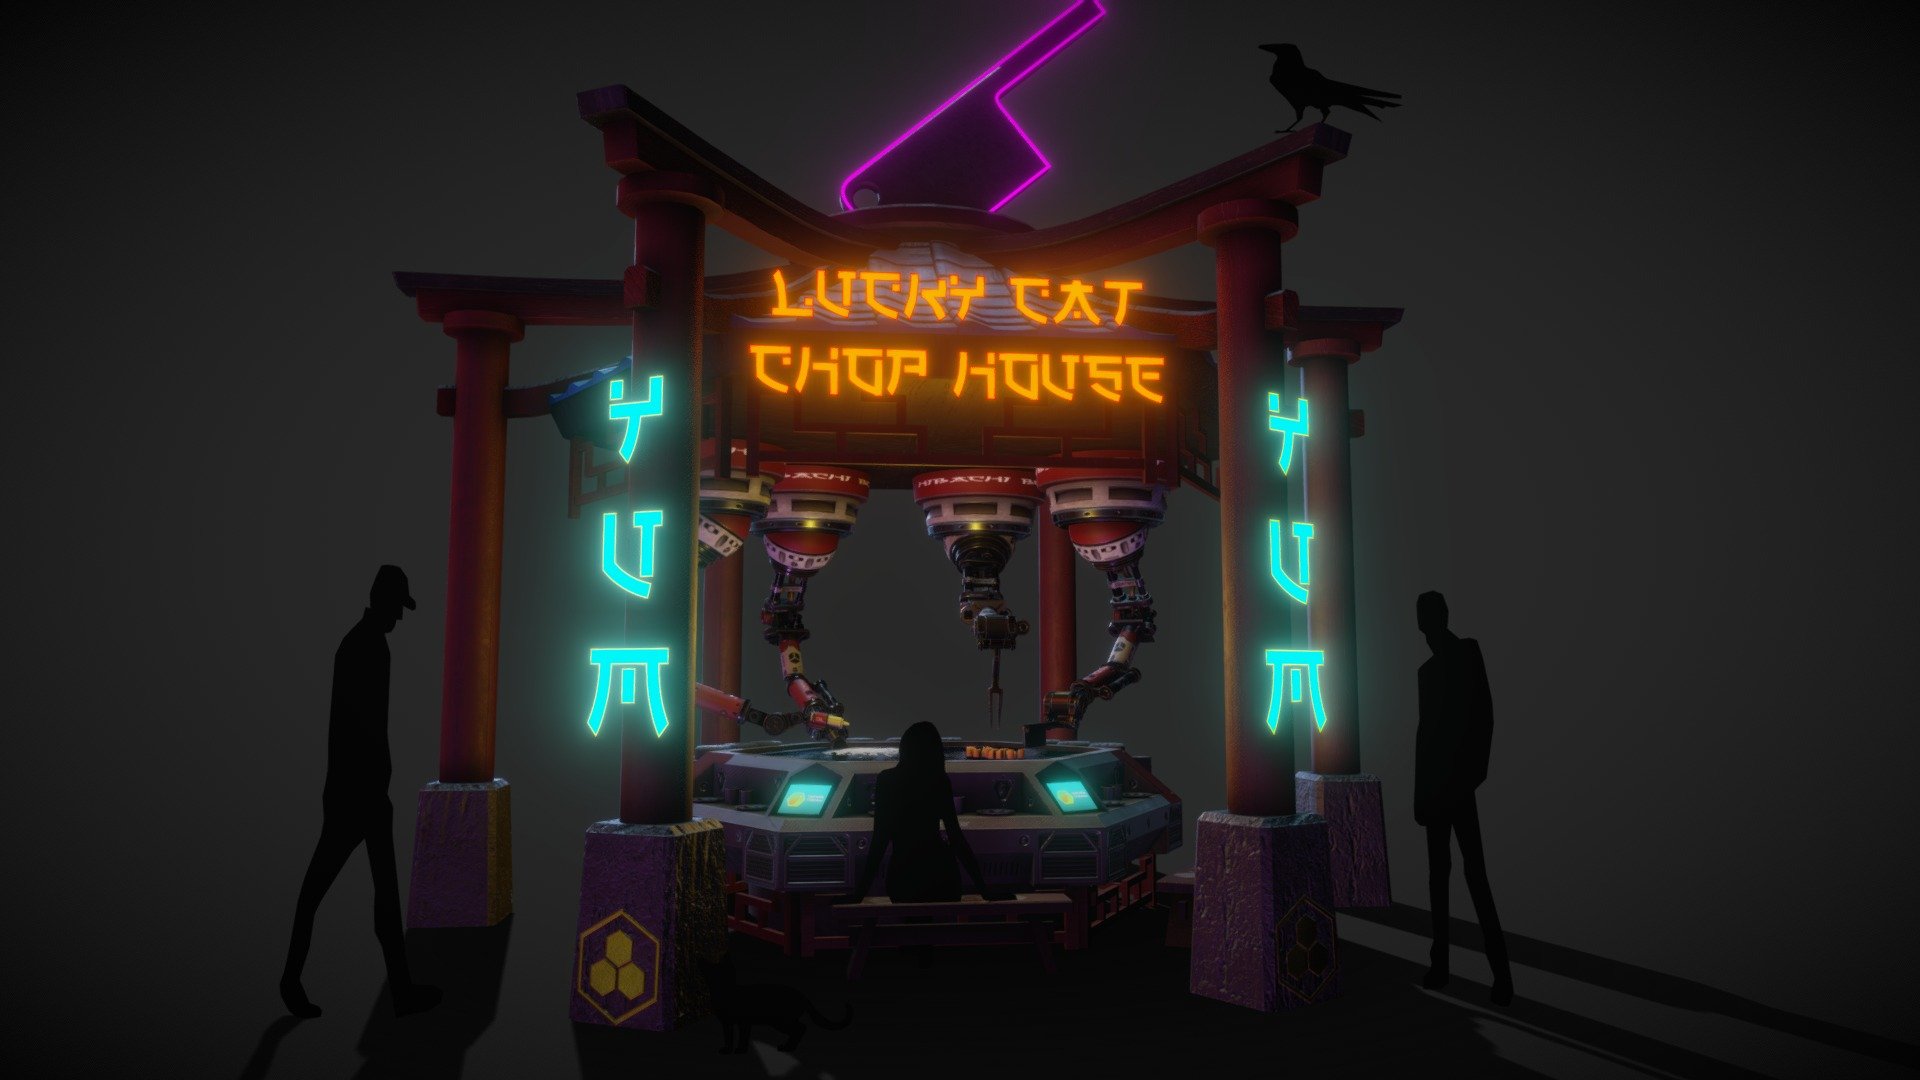 Sony Robot Challenge - Lucky Cat Chop House

The Lucky Cat is a blend of the future and current day.  To better build the perception of the peice for the viewers I decided to add some current day style.  Trying to stray away from the overly complicated themes of combat,lasers etc.. :D Rather to build a peice that shows usefulness and practicality.   Inspired by Blade Runner, Cyberpunk type imagery

Modeled with 3ds Max , textured with Substance Painter  

Sound effects edited together by me, sources for public use from &ldquo;Smoothie